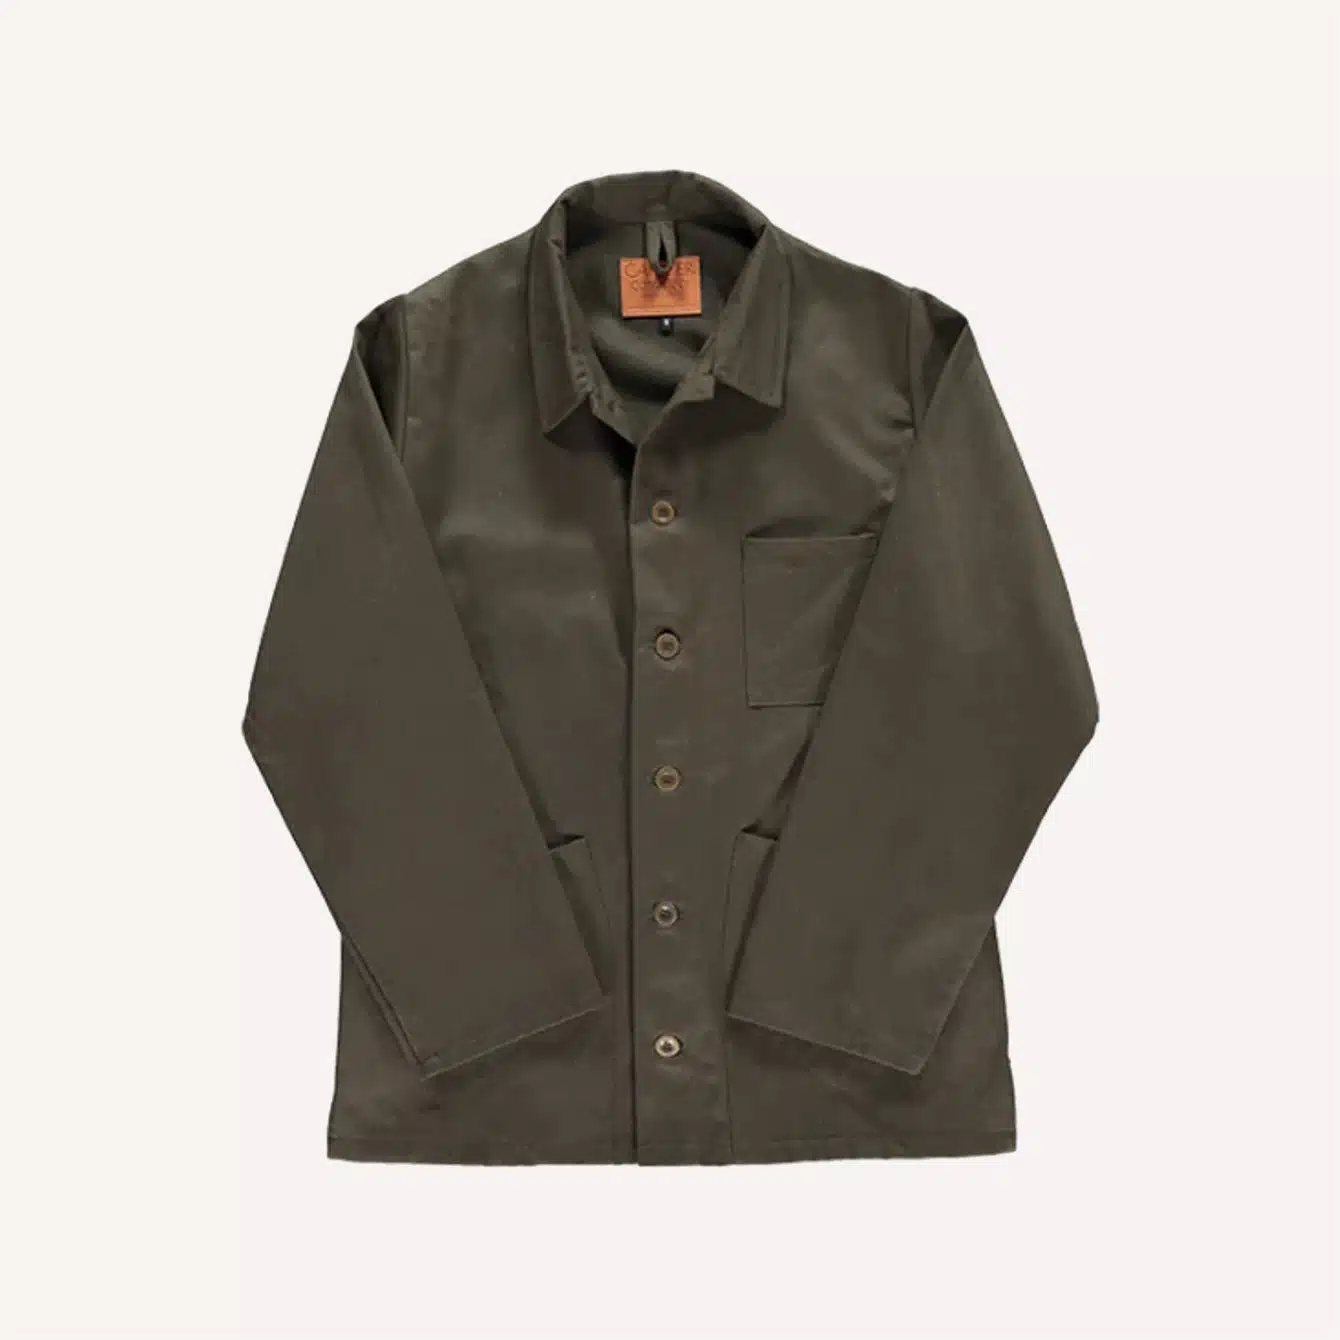 Carrier Company Work Jacket